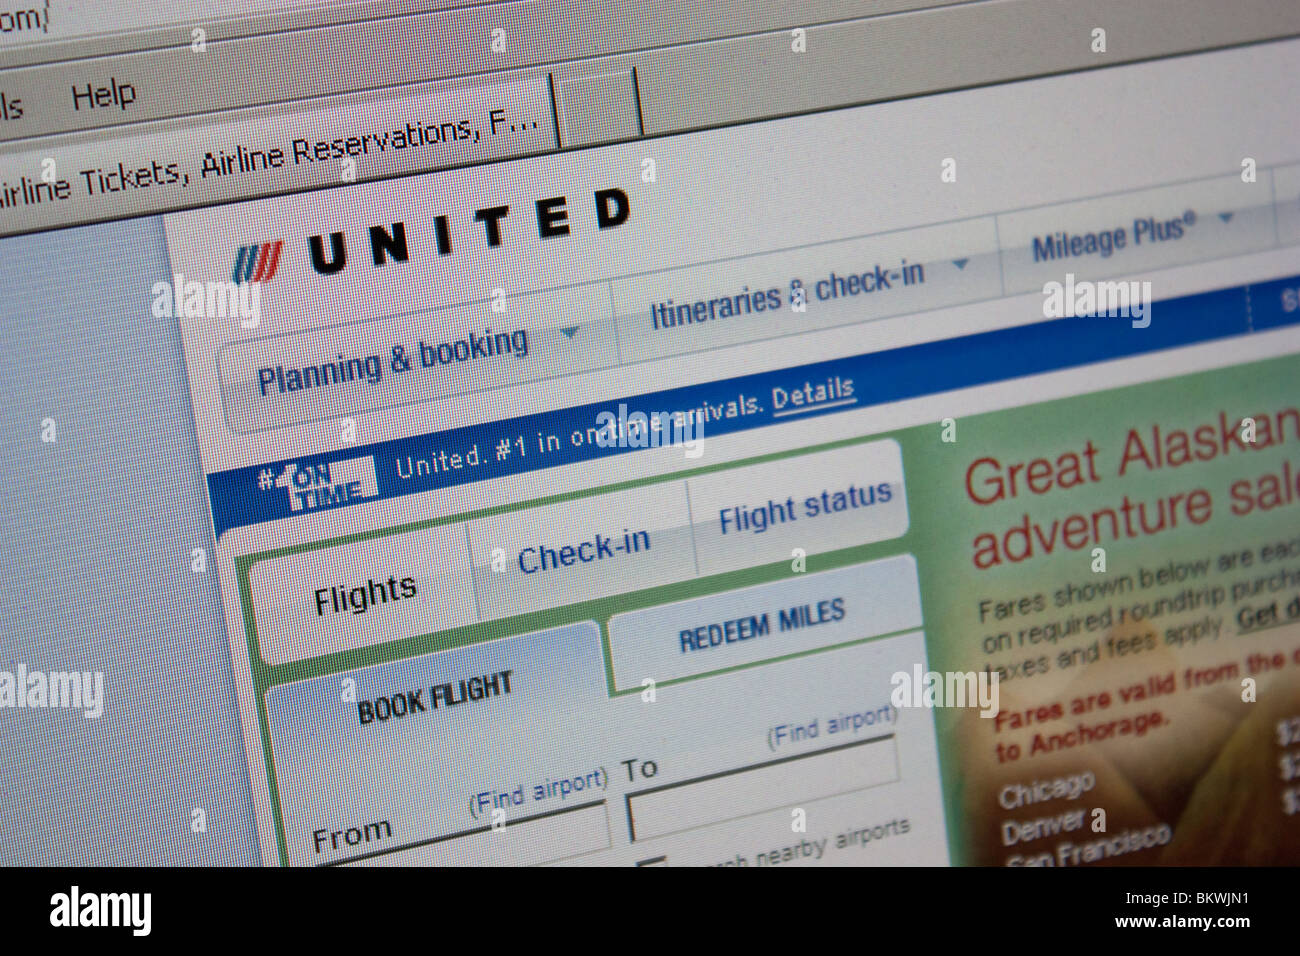 United Airline booking flight travel checkin Stock Photo